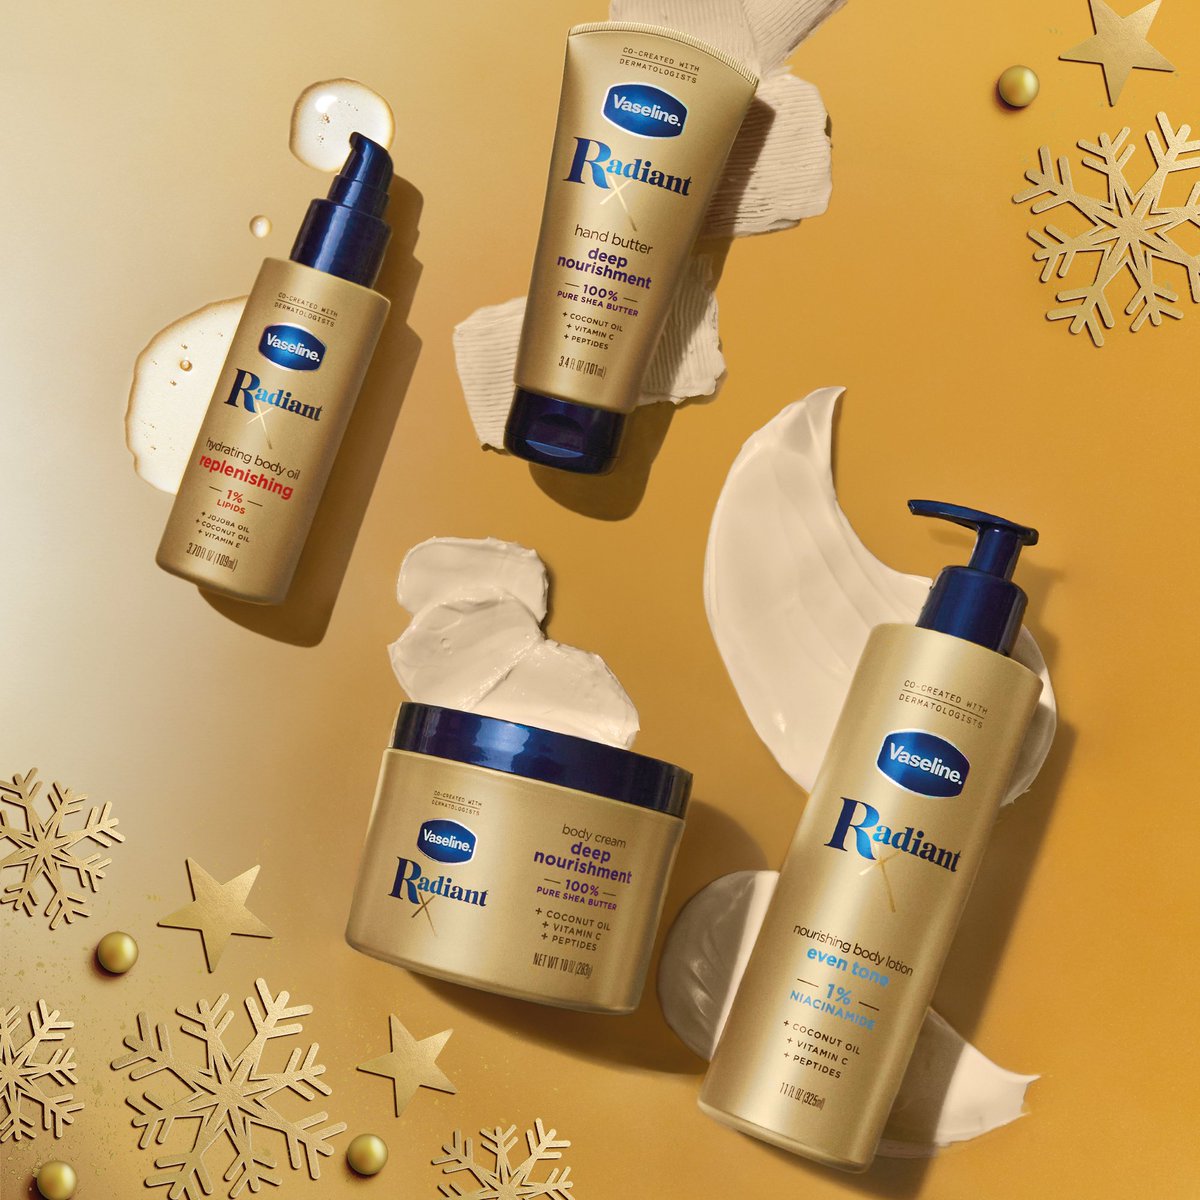 Is gorgeous, radiant skin at the top of your holiday wish list?✨🎁 Meet the new Vaseline Radiant X skincare collection with four products guaranteed to help your skin shine as bright as a Christmas tree🎄​ #Vaseline #RadiantX #BodycareProducts #HolidayGiftGuide #HolidayWishList